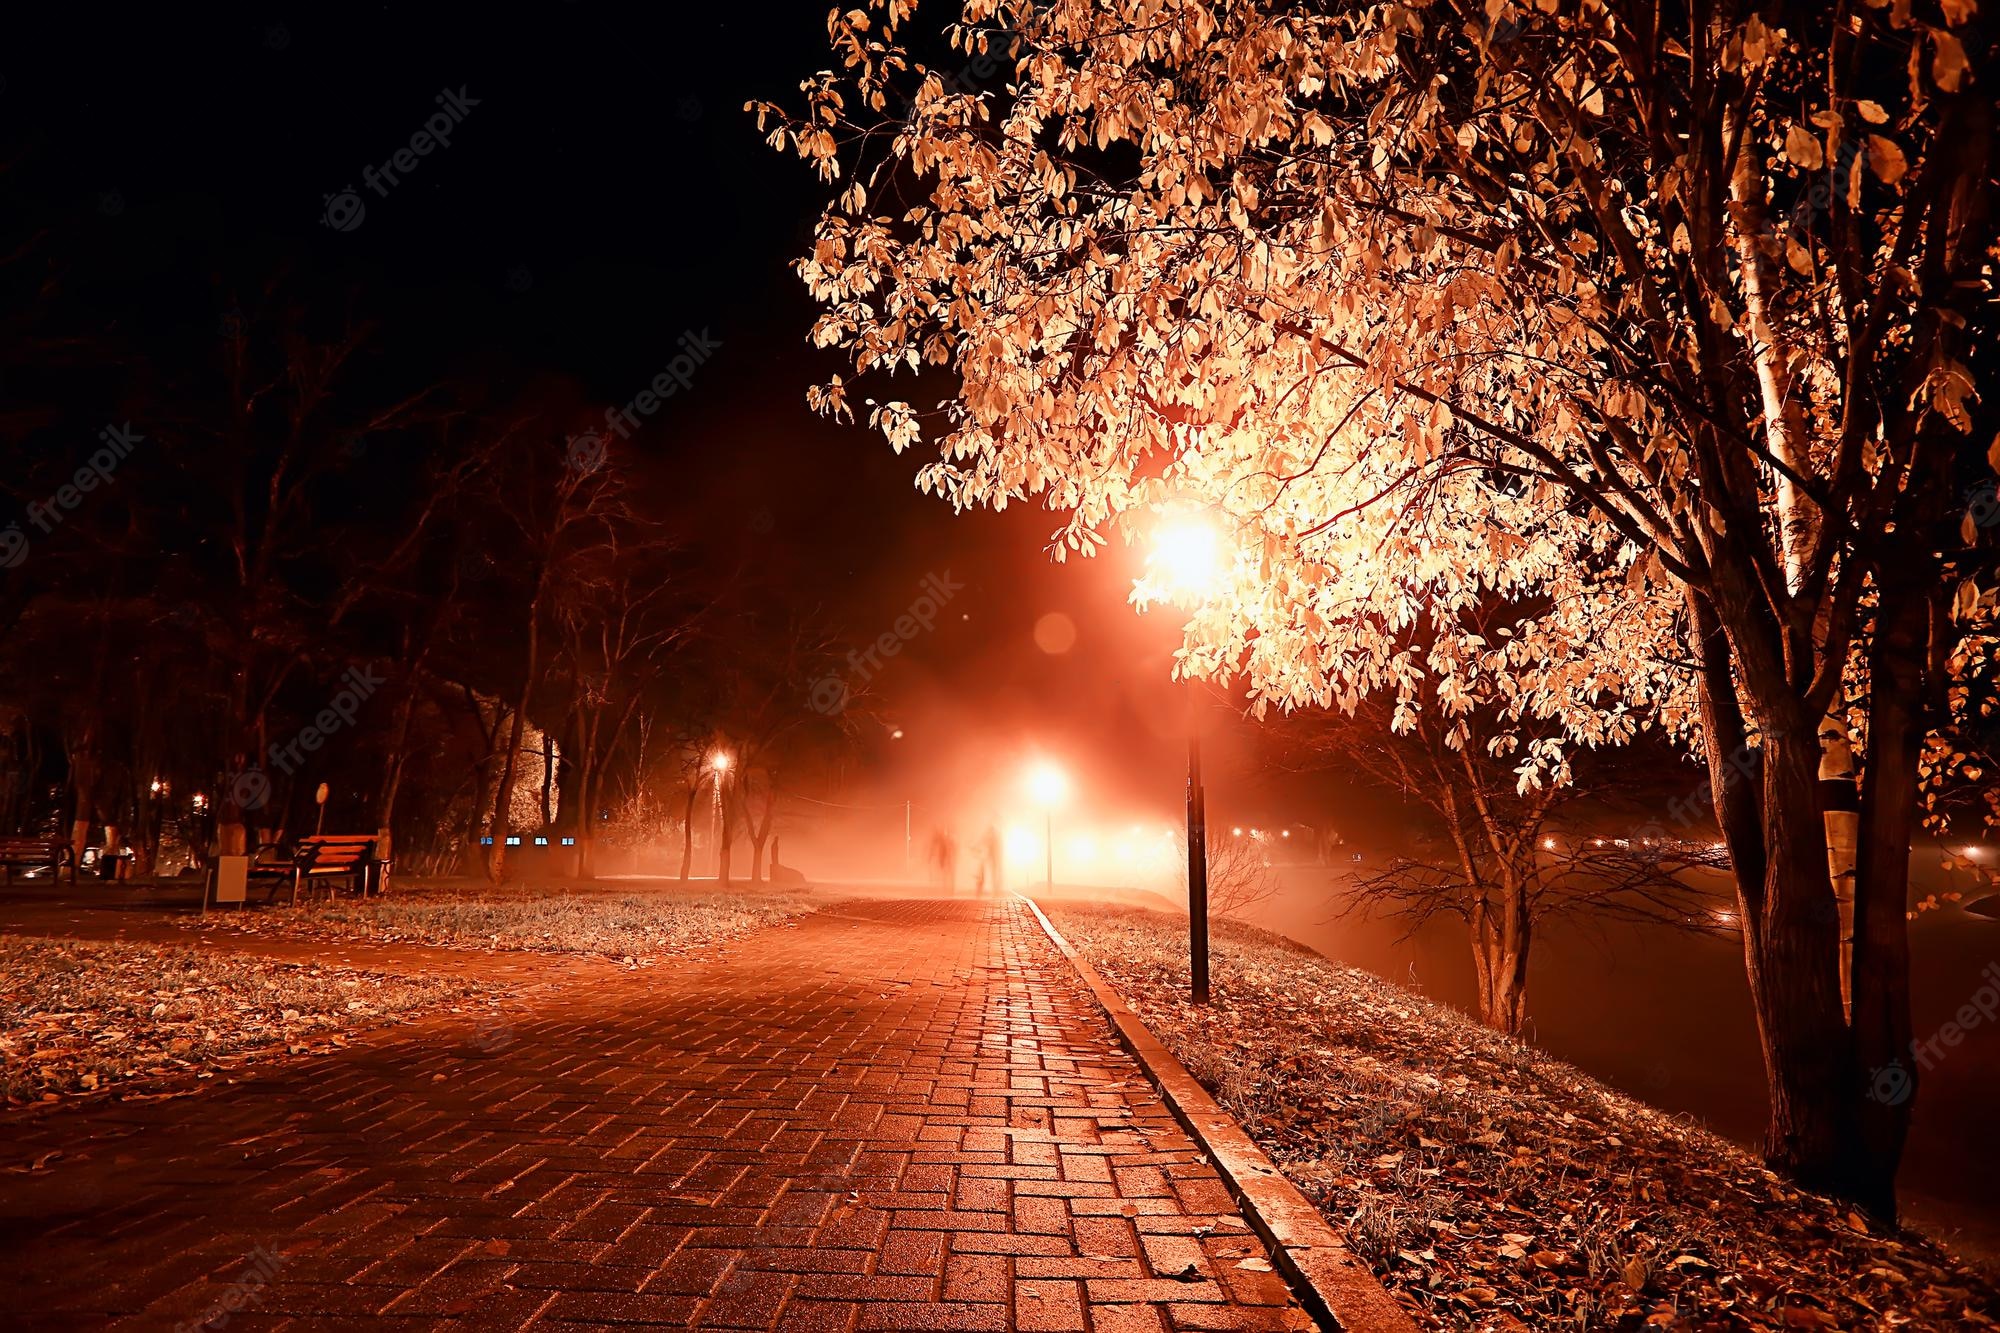 Premium Photo. Night in the park landscape, abstract view of the alley, trees and lights in the autumn blurred background